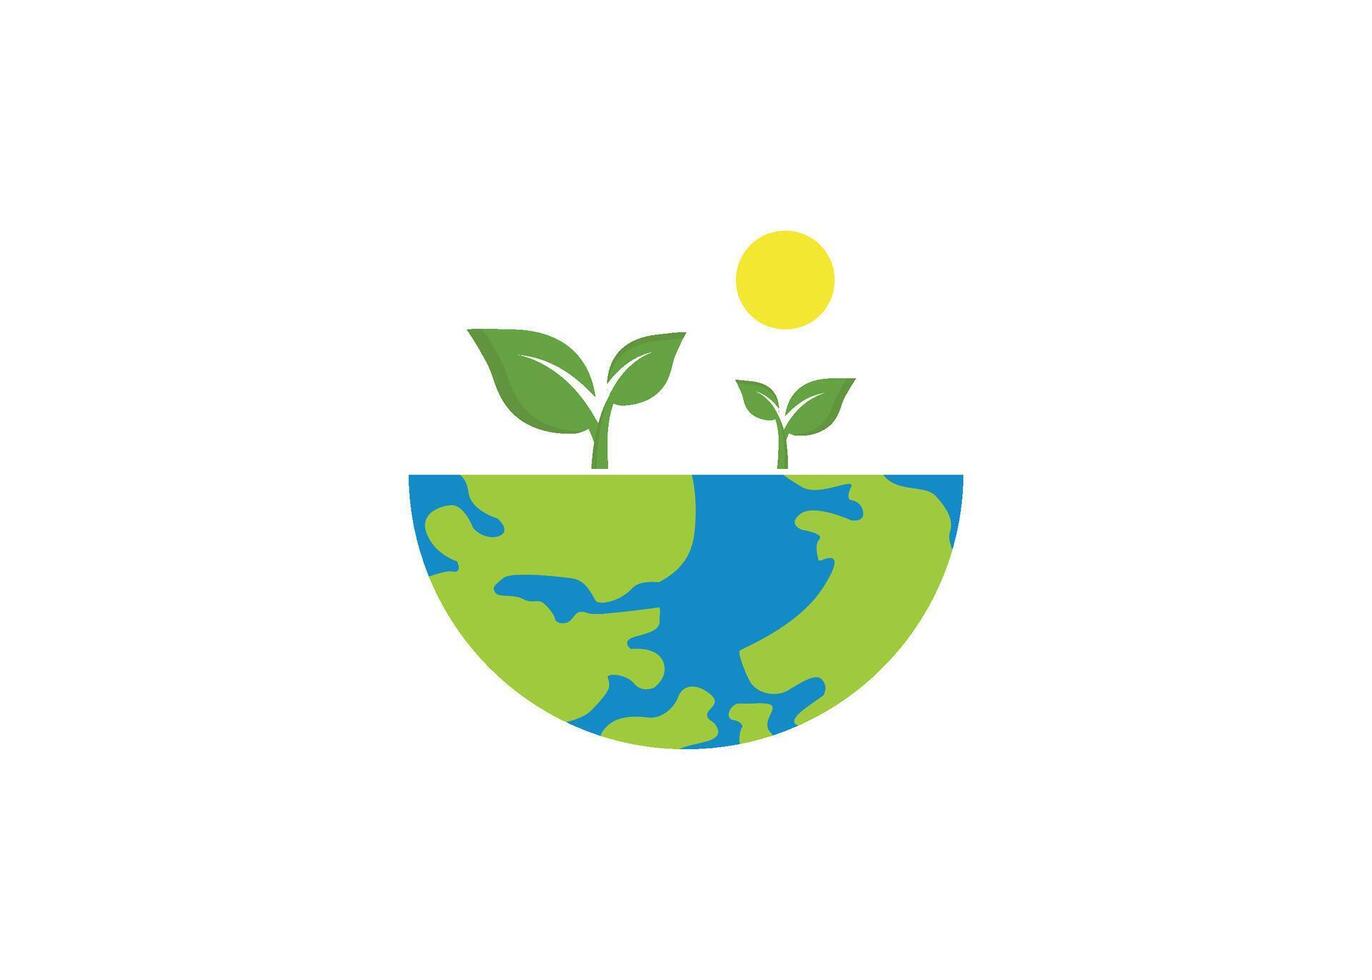 Nature earth icon design template isolated illustration vector